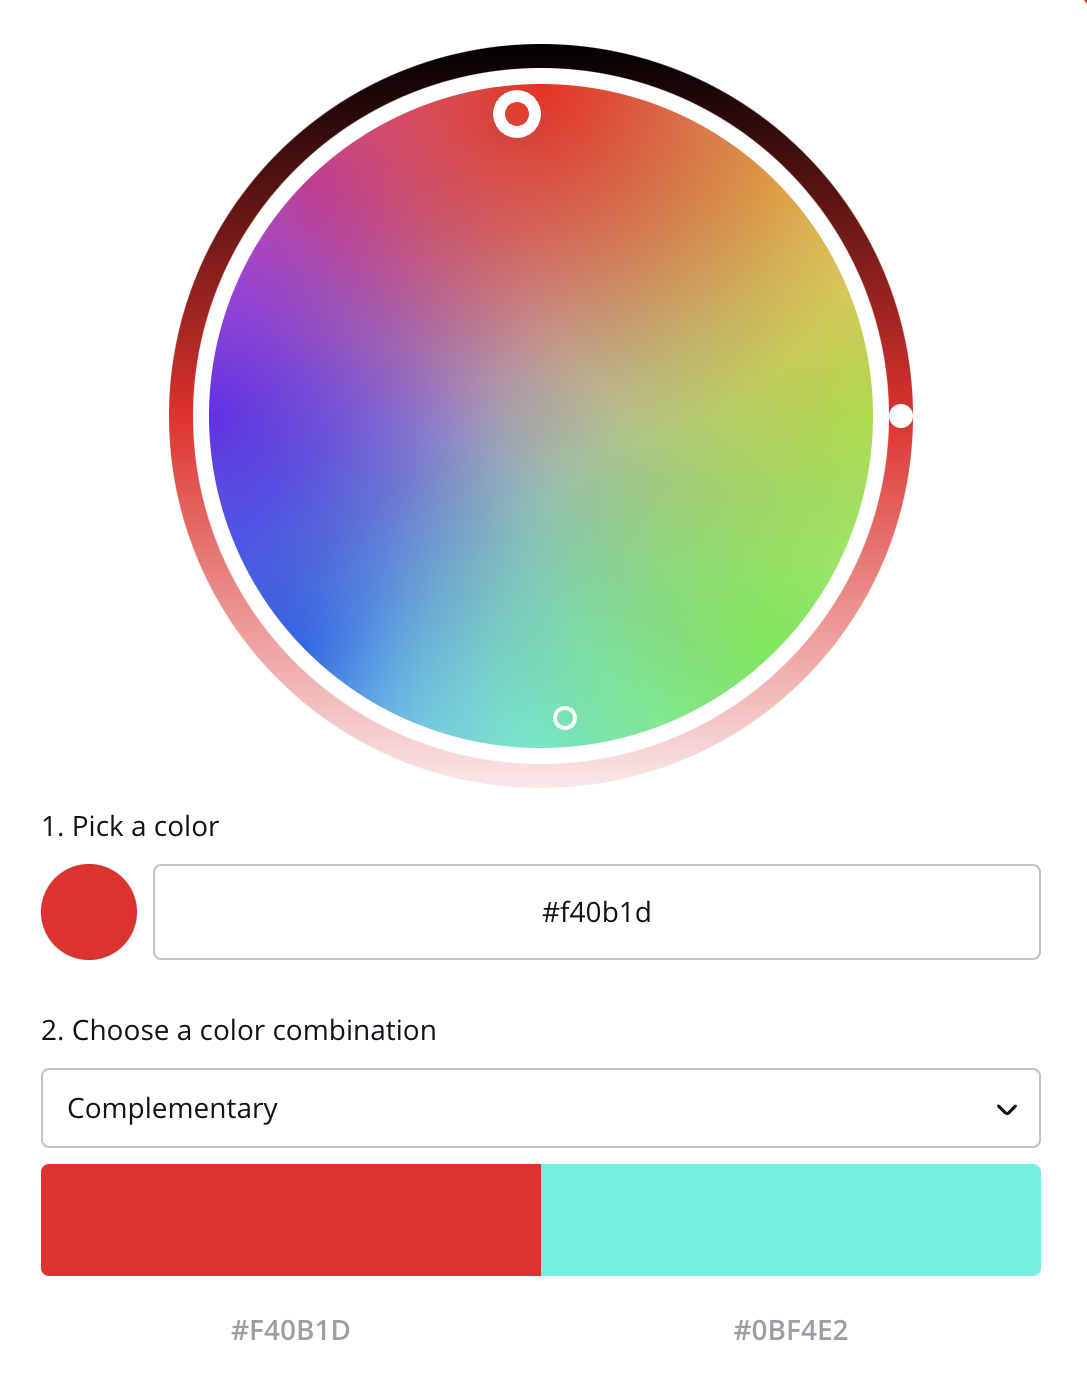 A color wheel showing an example of a complimentary color scheme